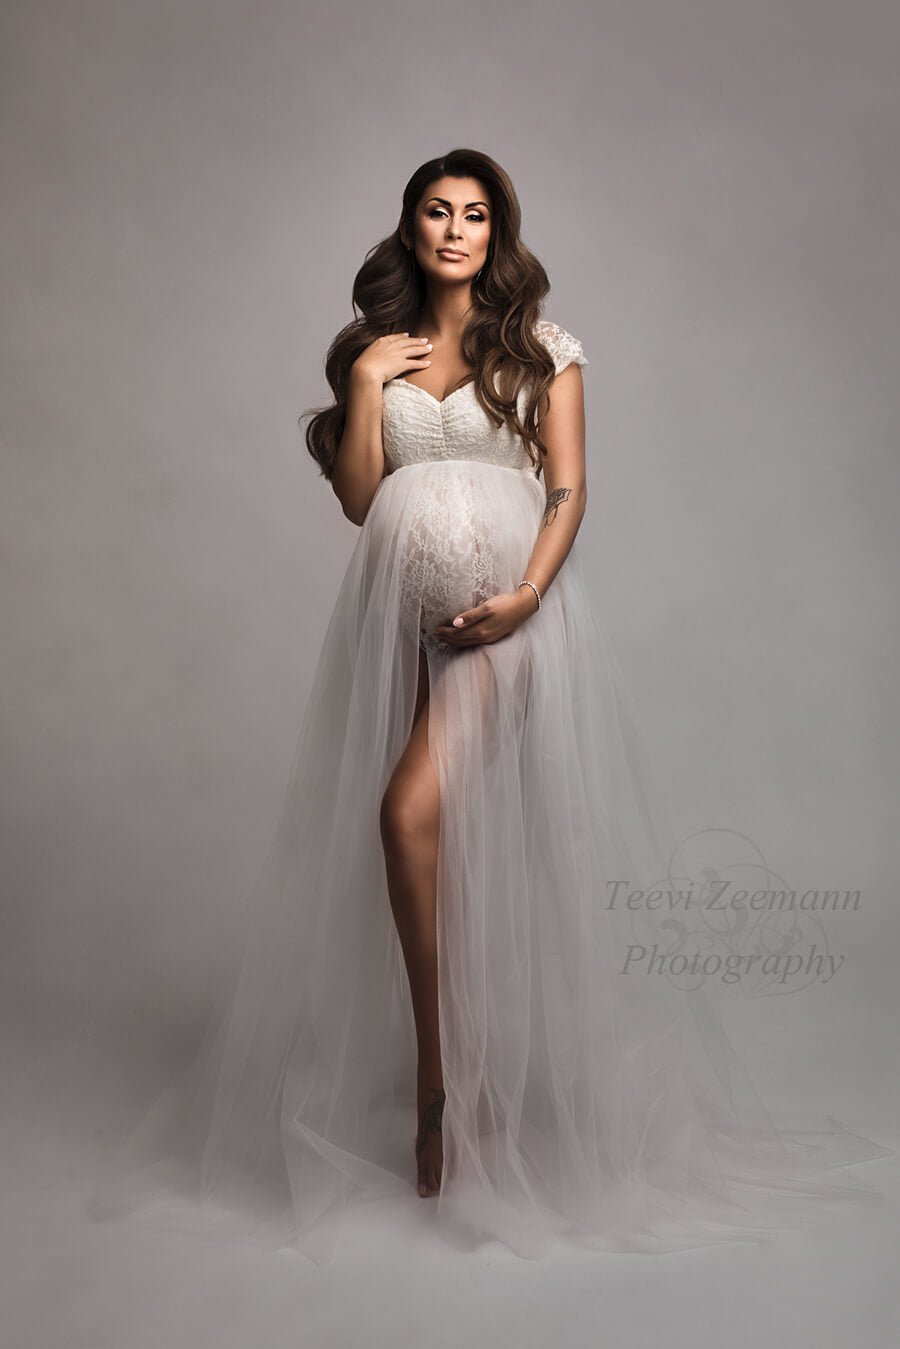 Brunette model poses in a studio wearing the strelitzia set from mii-estilo. The off white gown is a bodysuit together with a tulle skirt. The model is standing tall and facing the camera - one hand holds her bump and the other lays on her neck. One of her legs can be seen through the tulle skirt split.